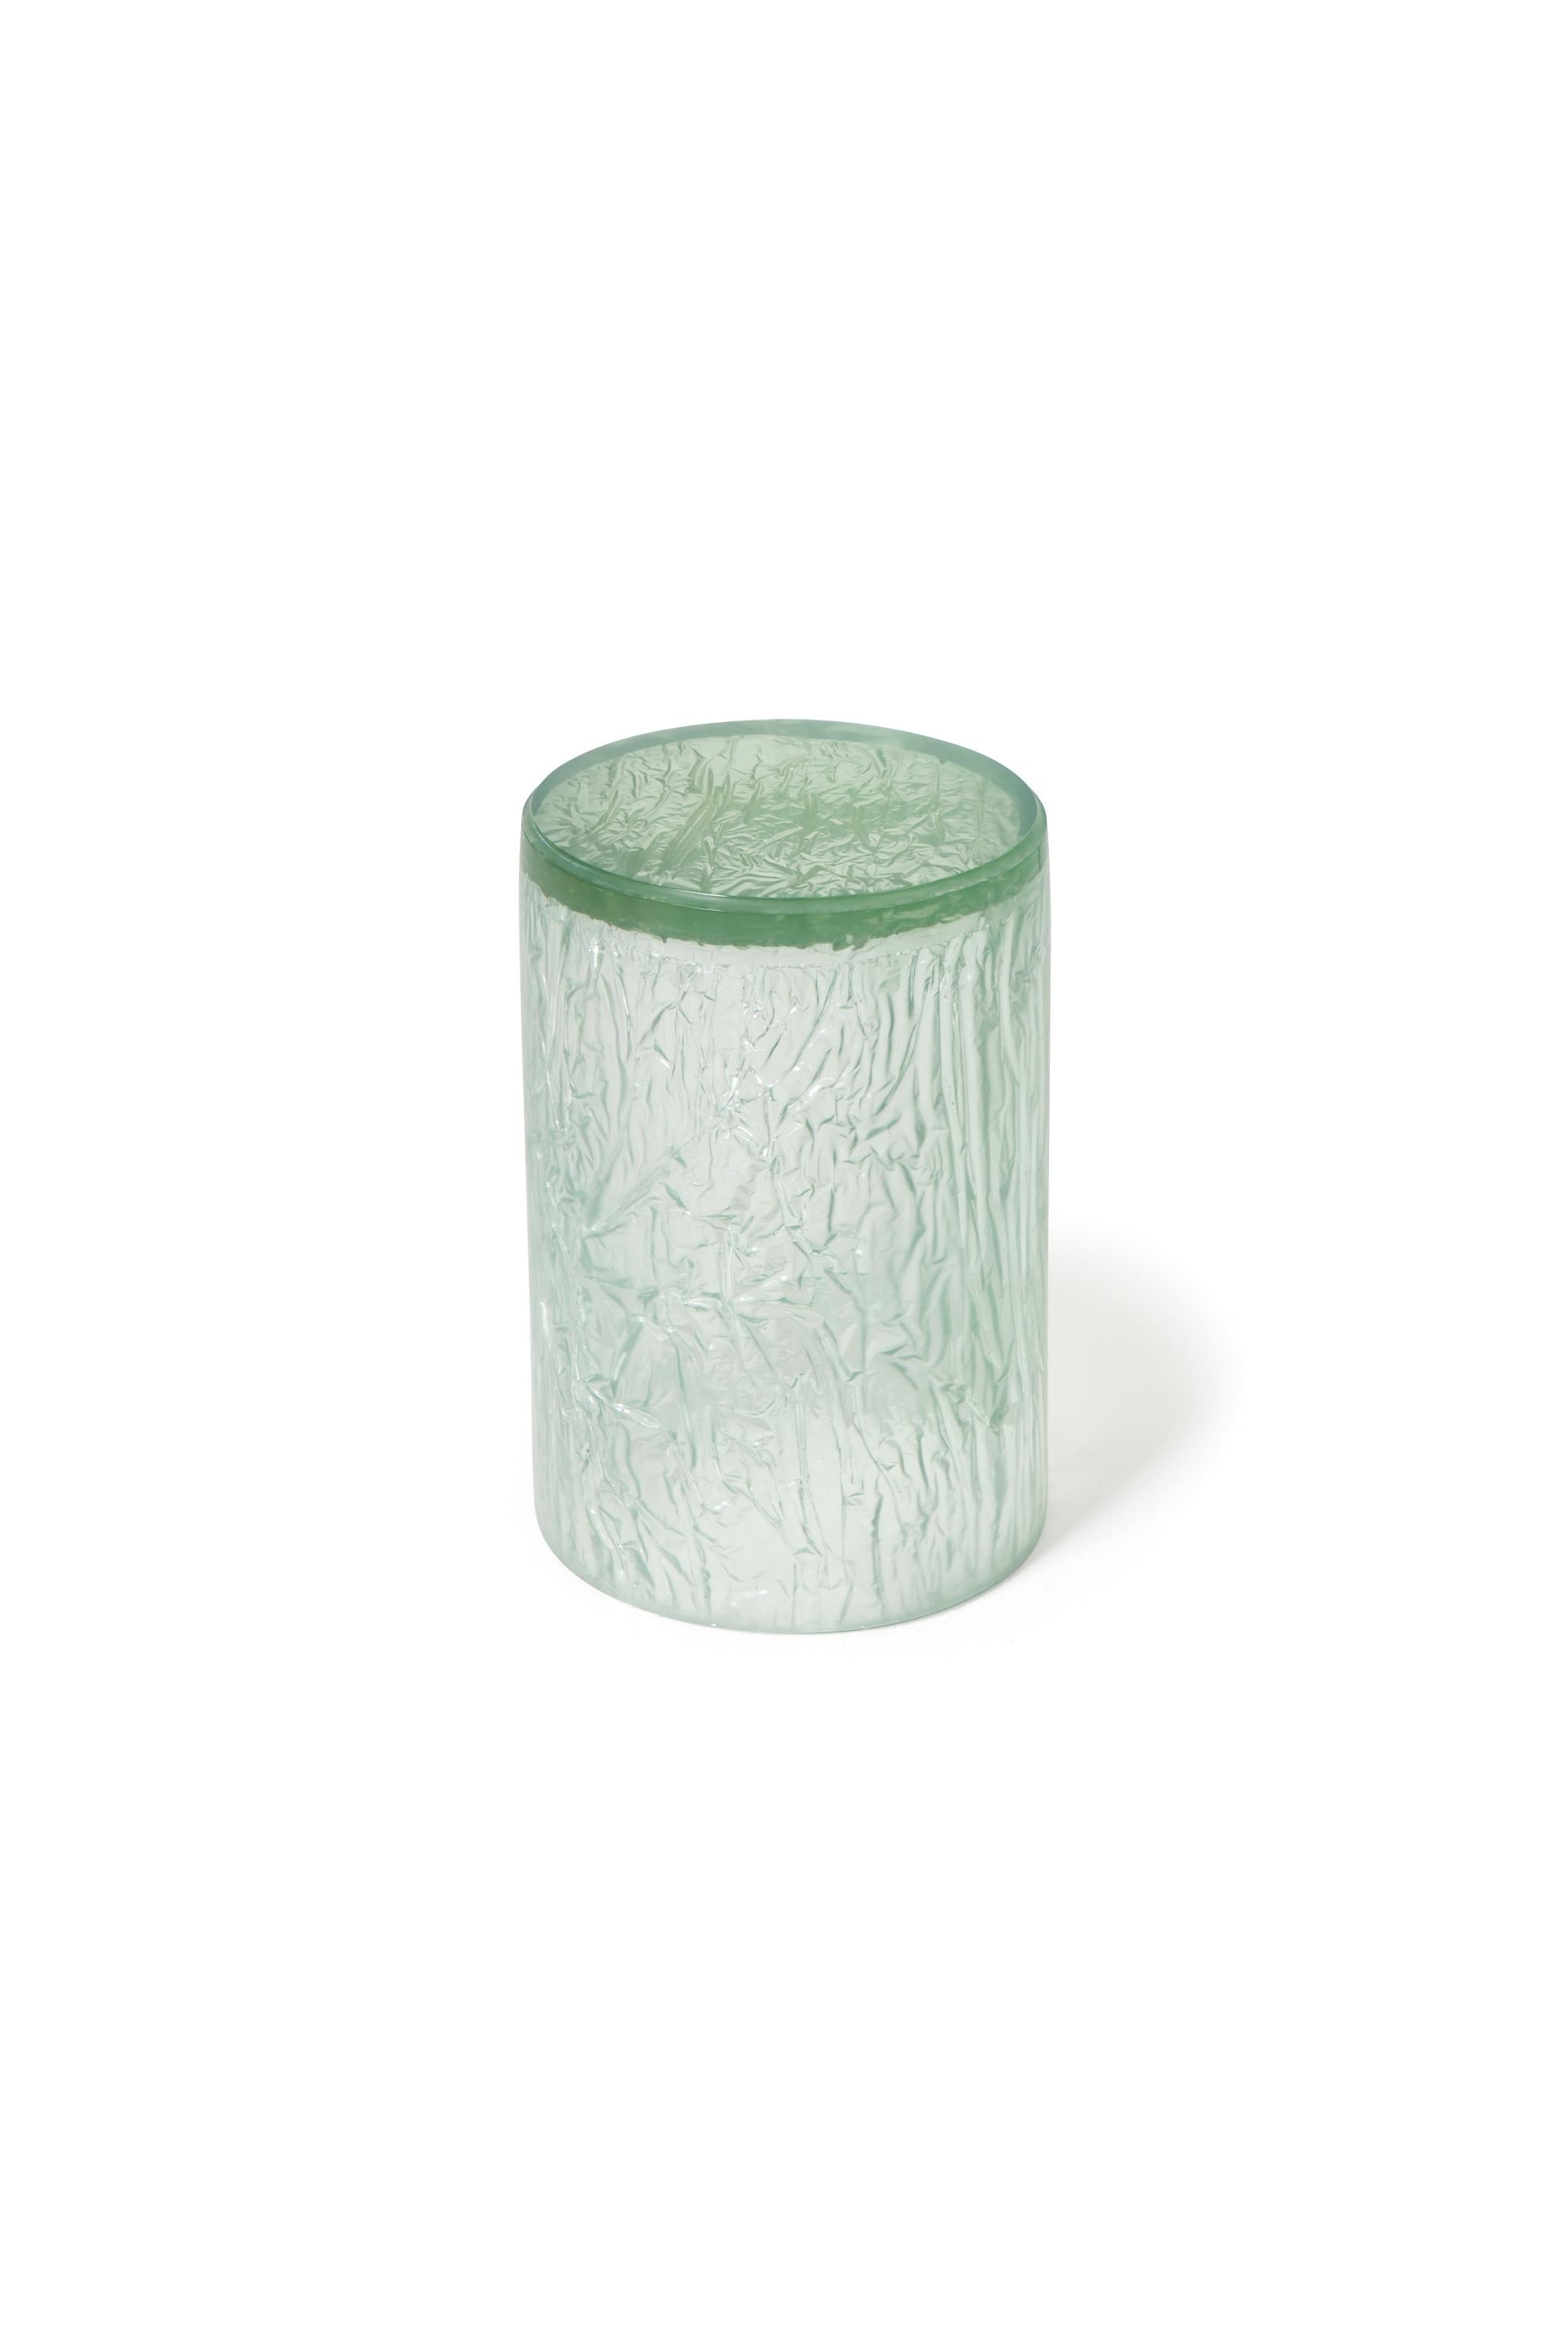 Contemporary Resin Acrylic Side Table or Stool by Natalie Tredgett, Gloss, Green In New Condition For Sale In London, GB